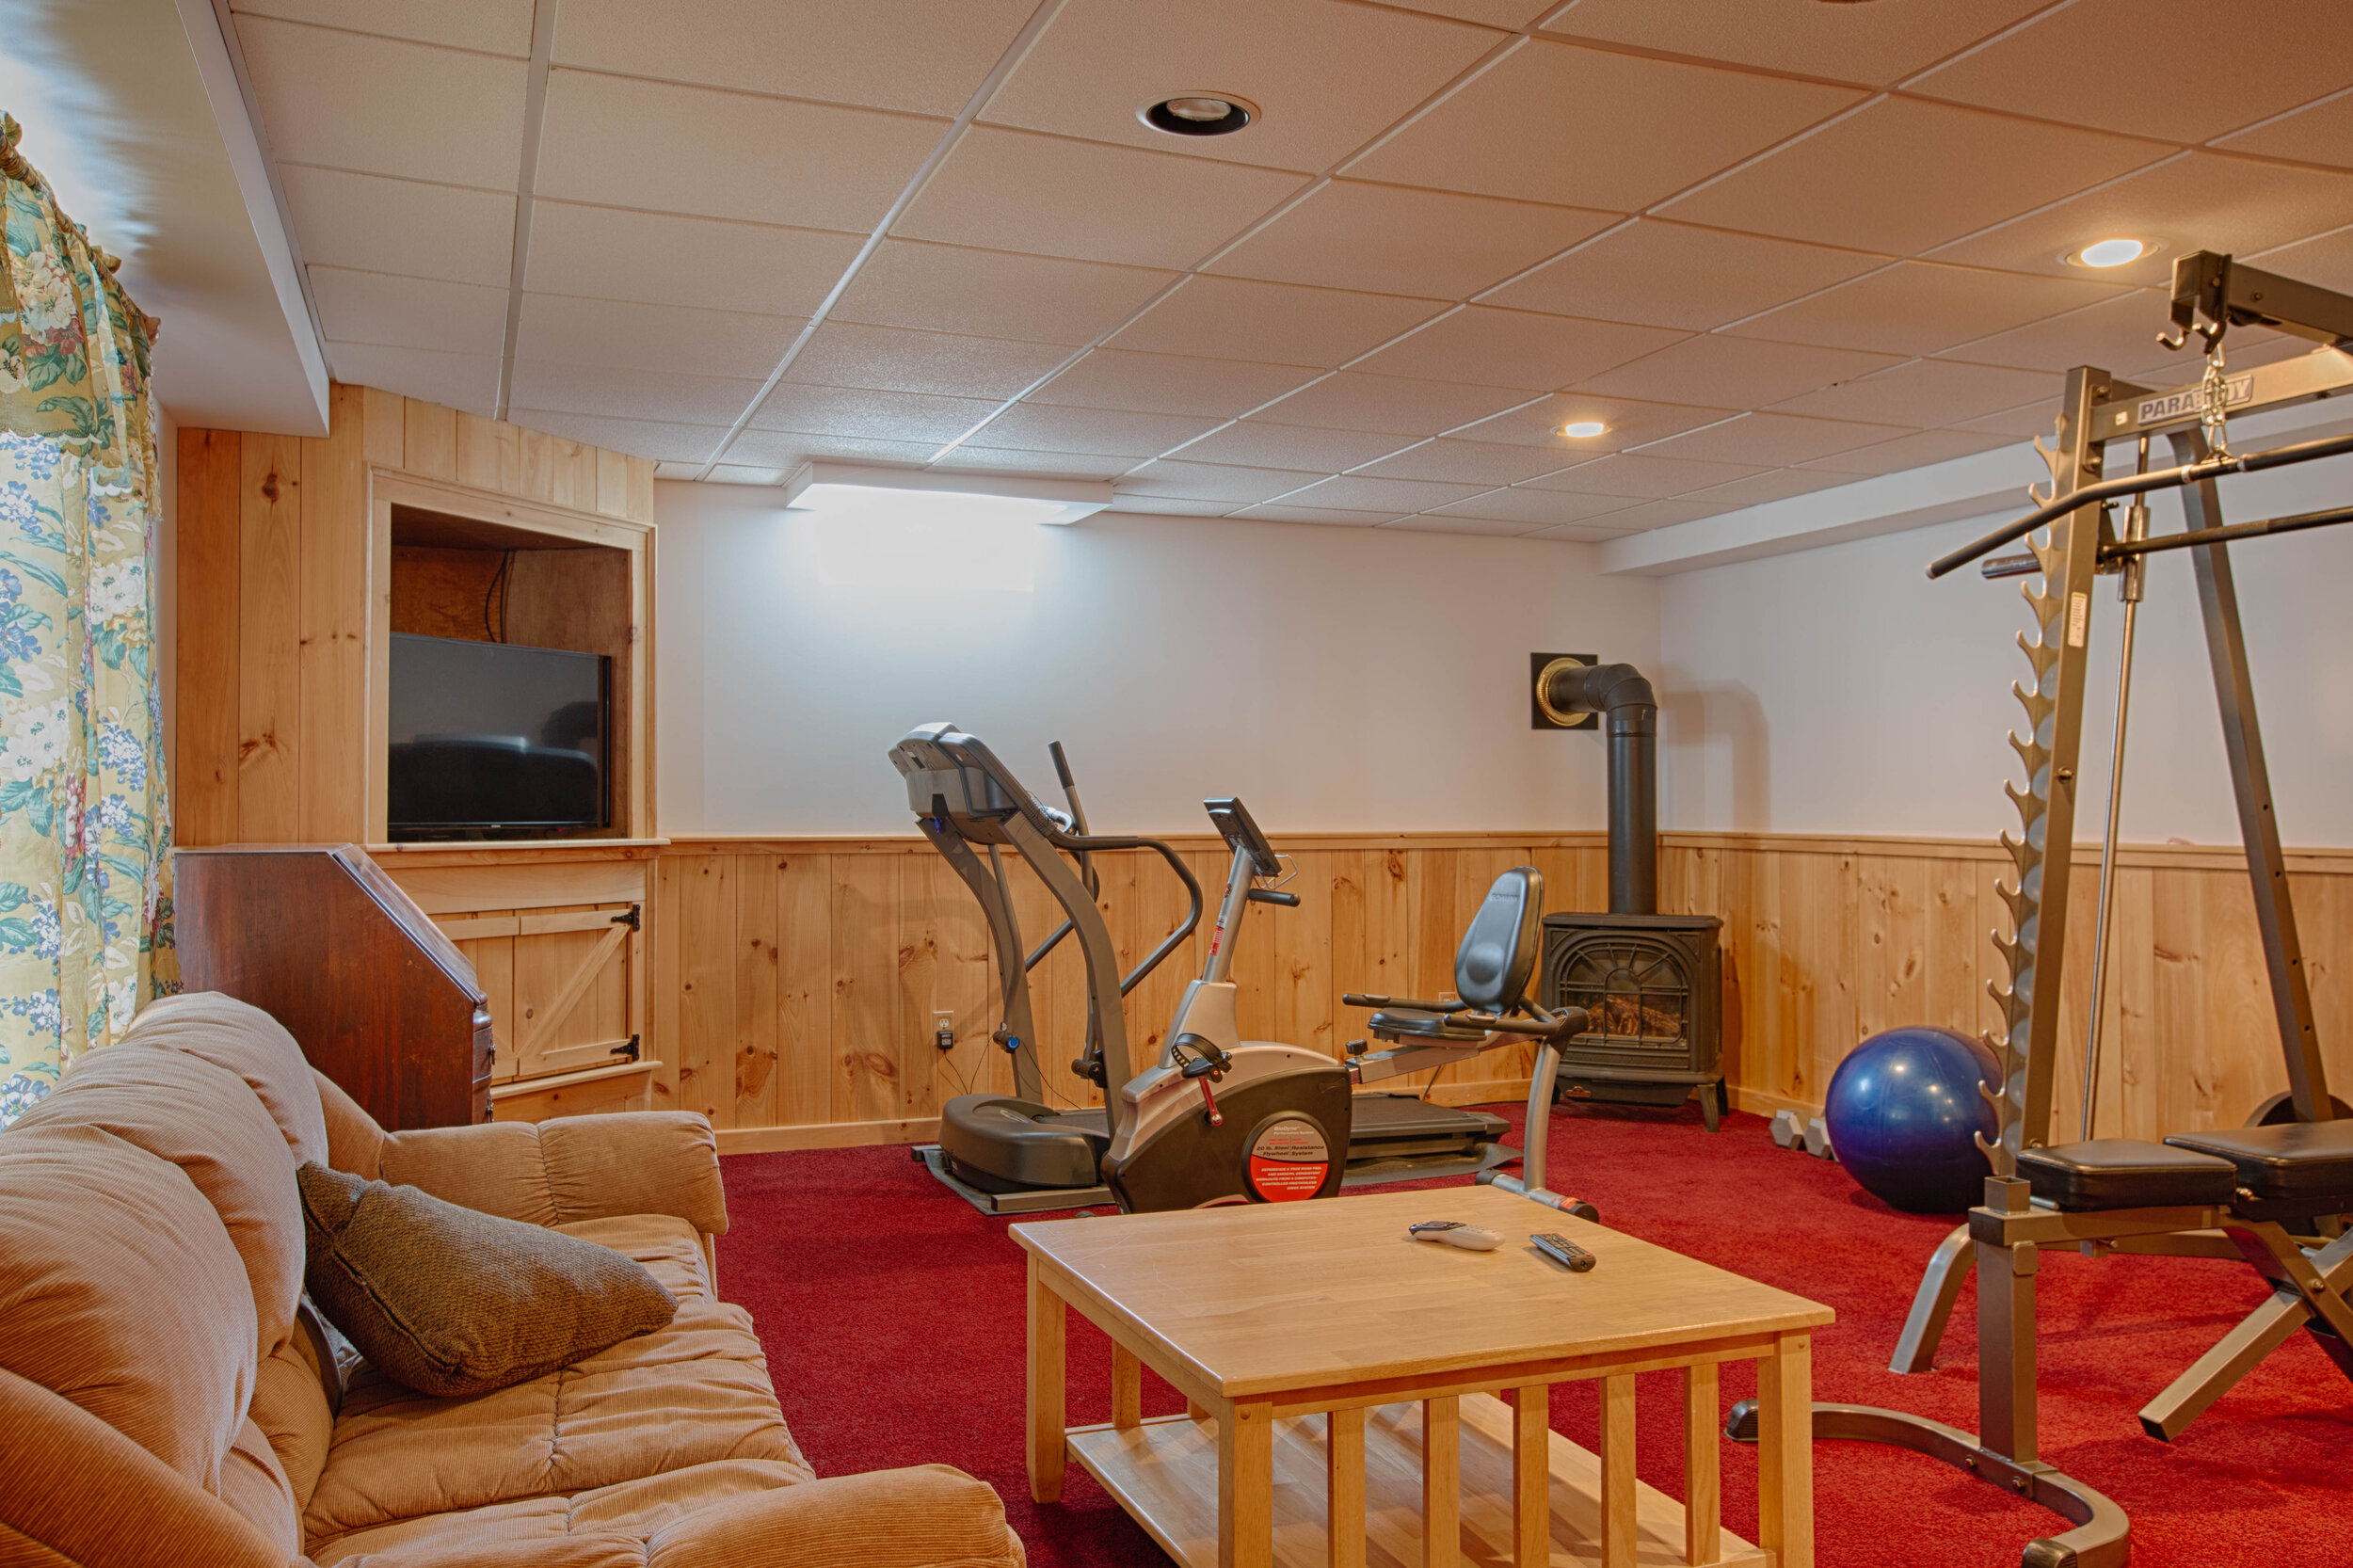  Basement with couch to the left, table in the center and workout equipment in the background on top of a red rug.  Also, there is a wood burning stove in the corner of the photo. 